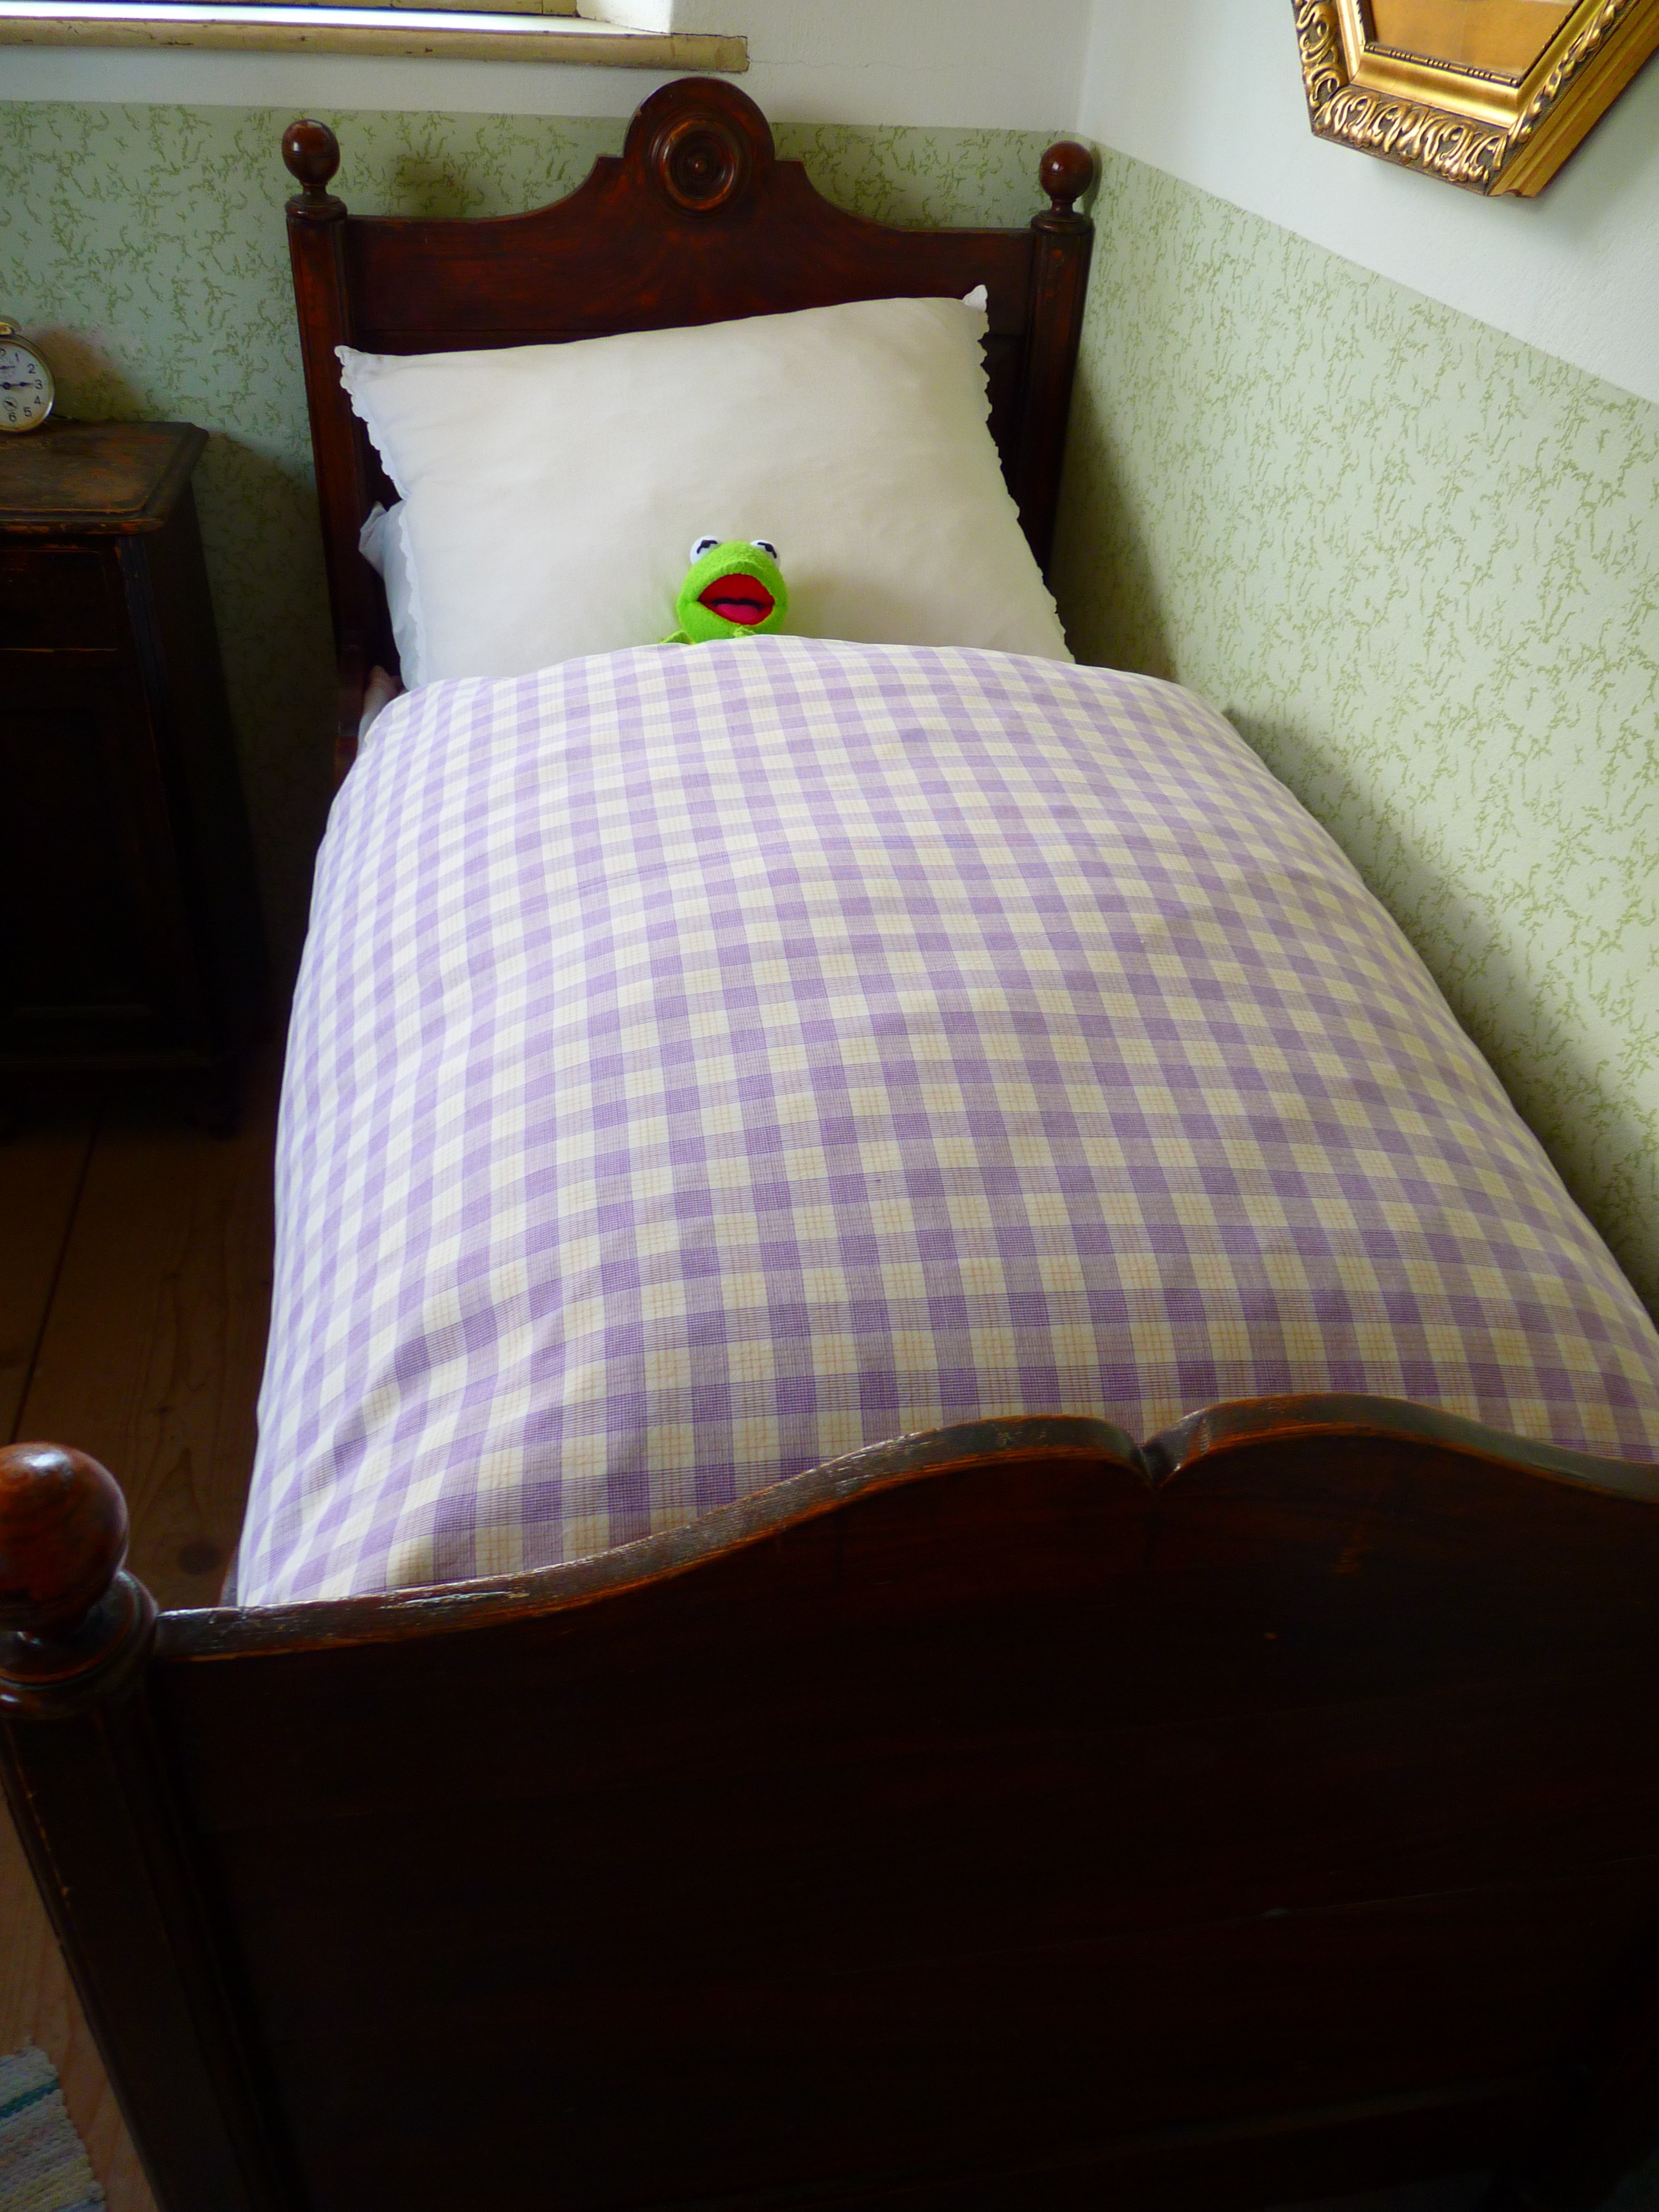 brown wooden bed frame with purple and white gingham blanket